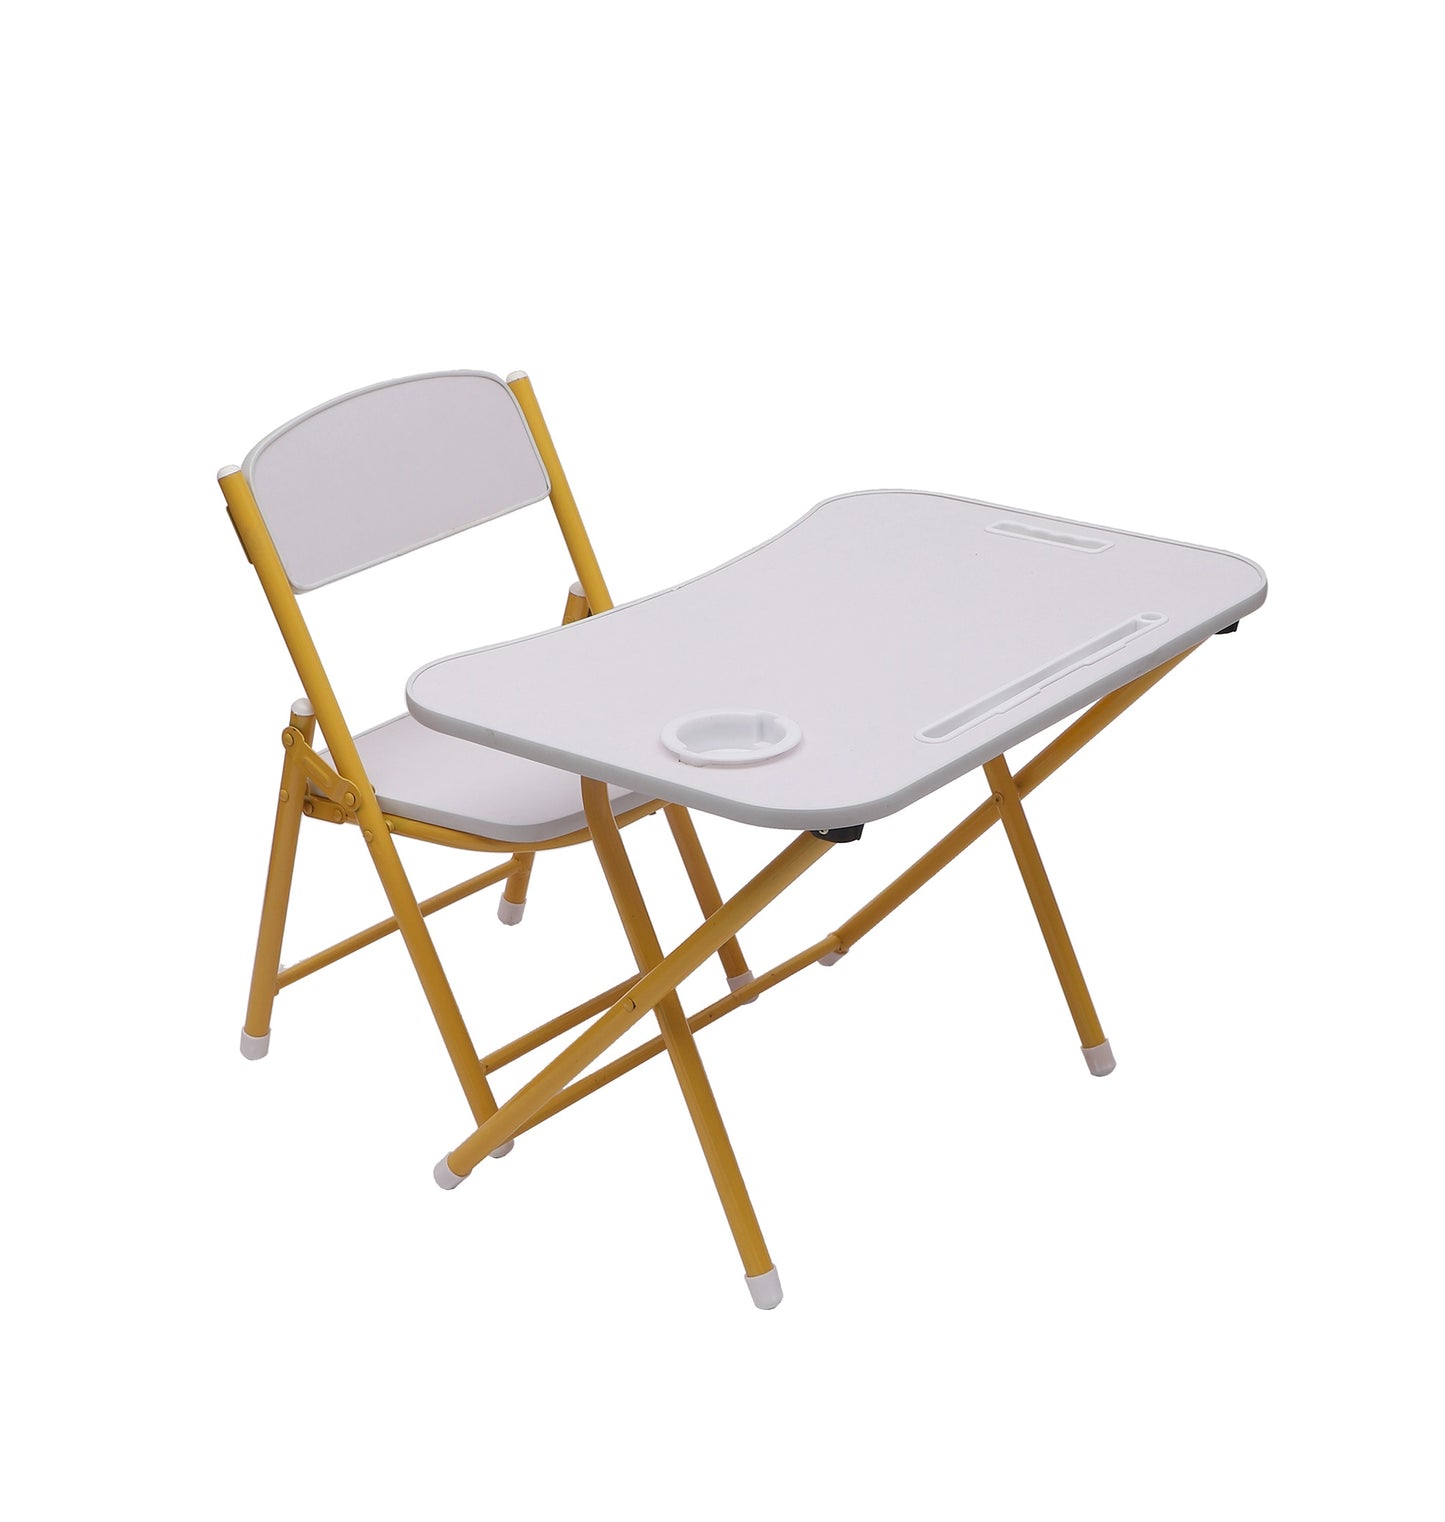 Foldable Table Chair Set White (3-6 yrs)